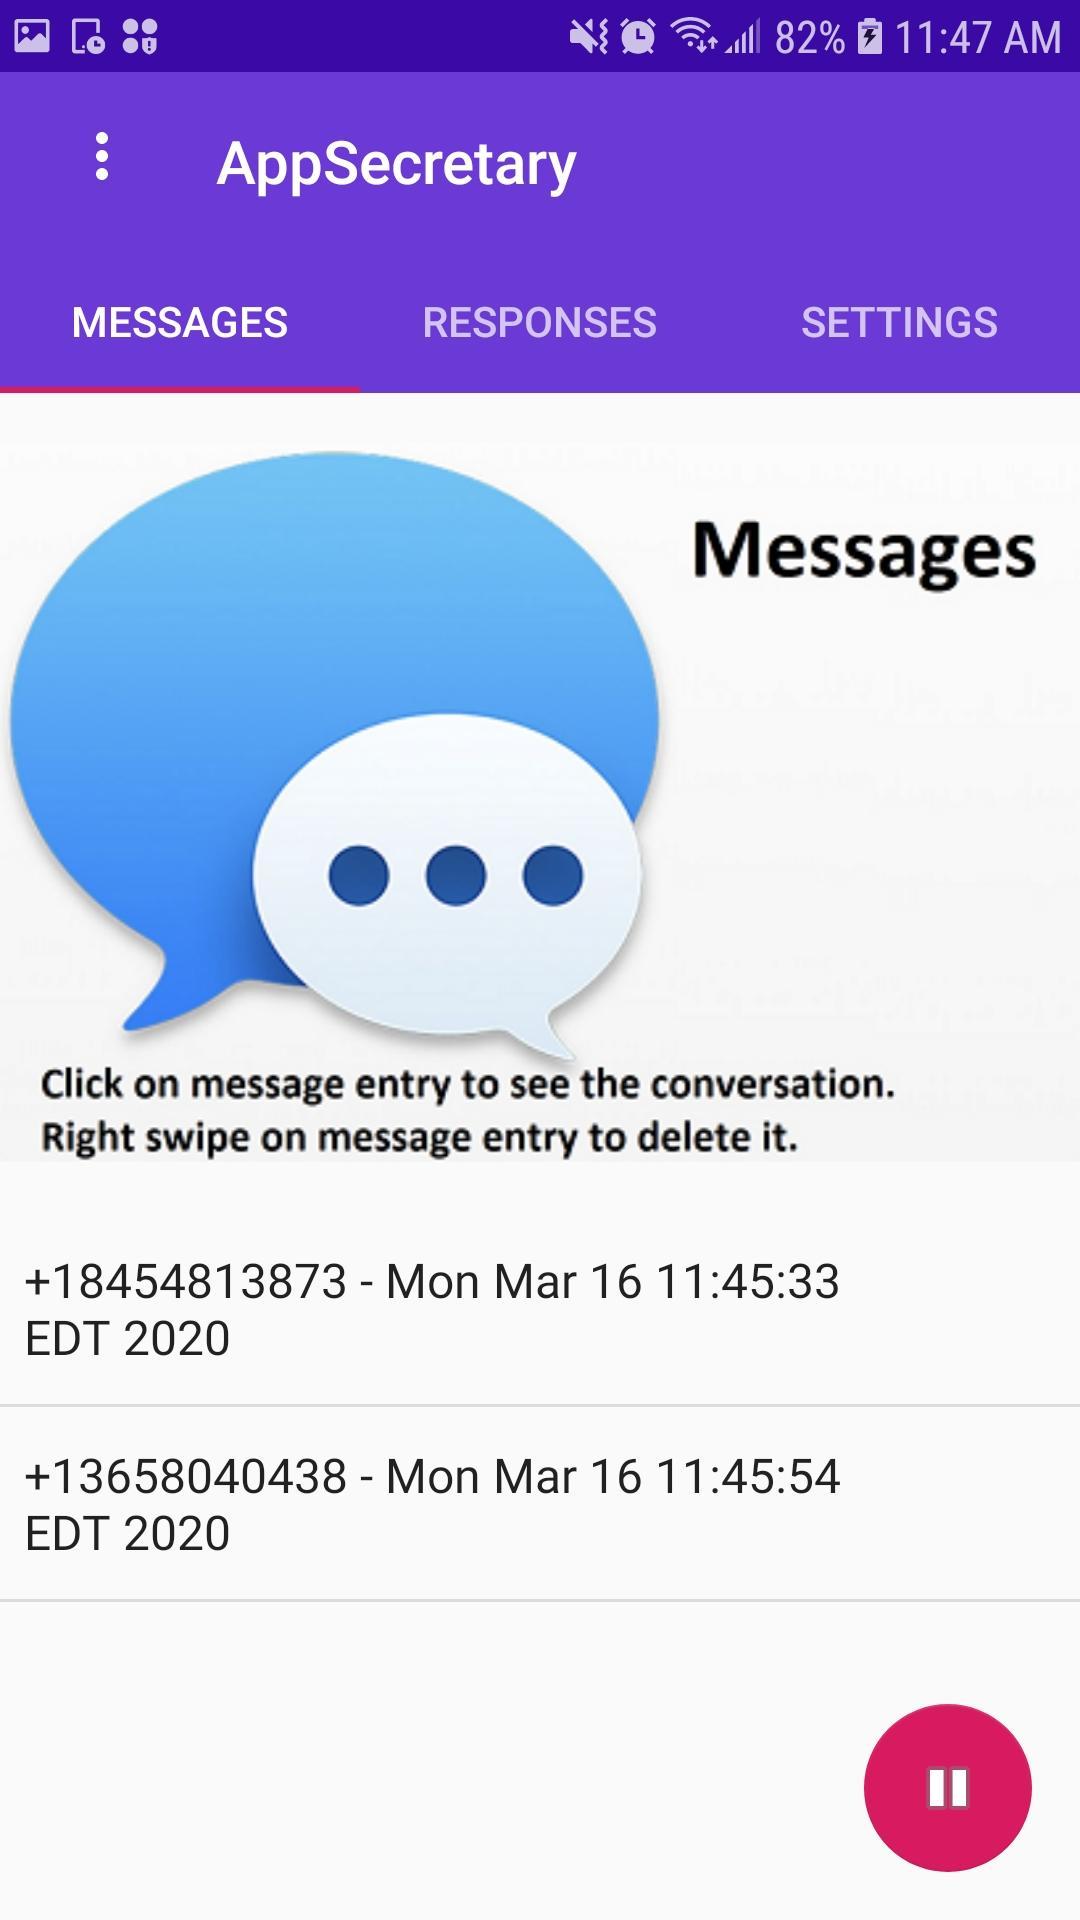 AppSecretary Auto Reply SMS Text Messages screenshot